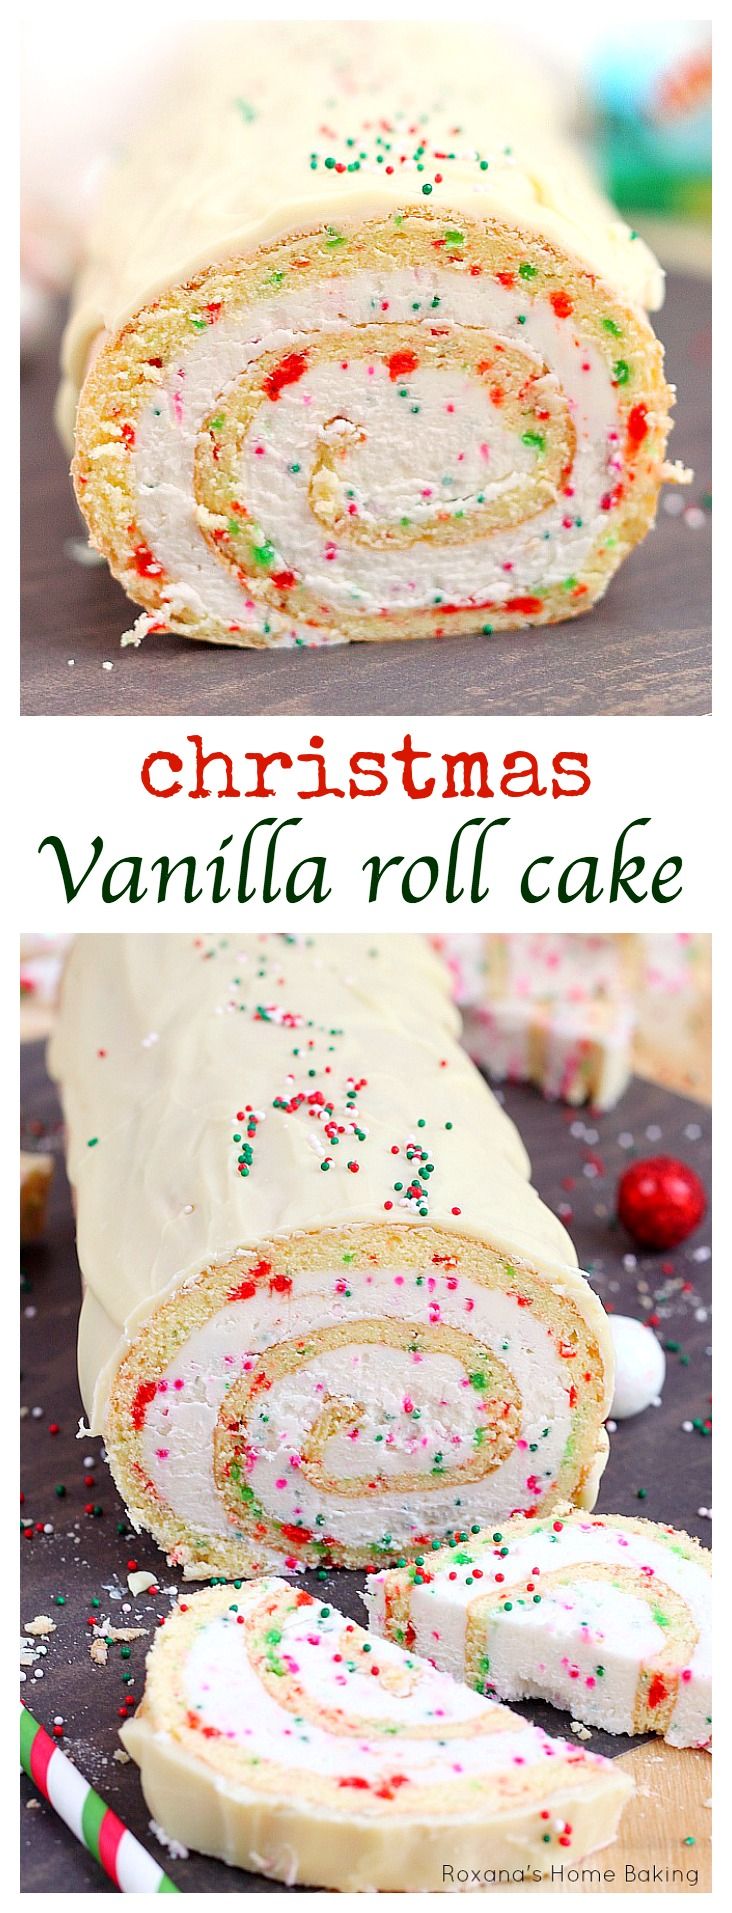 A simple vanilla roll cake with red and green dots and spirals of creamy buttercream is the perfect dessert for Christmas parties.